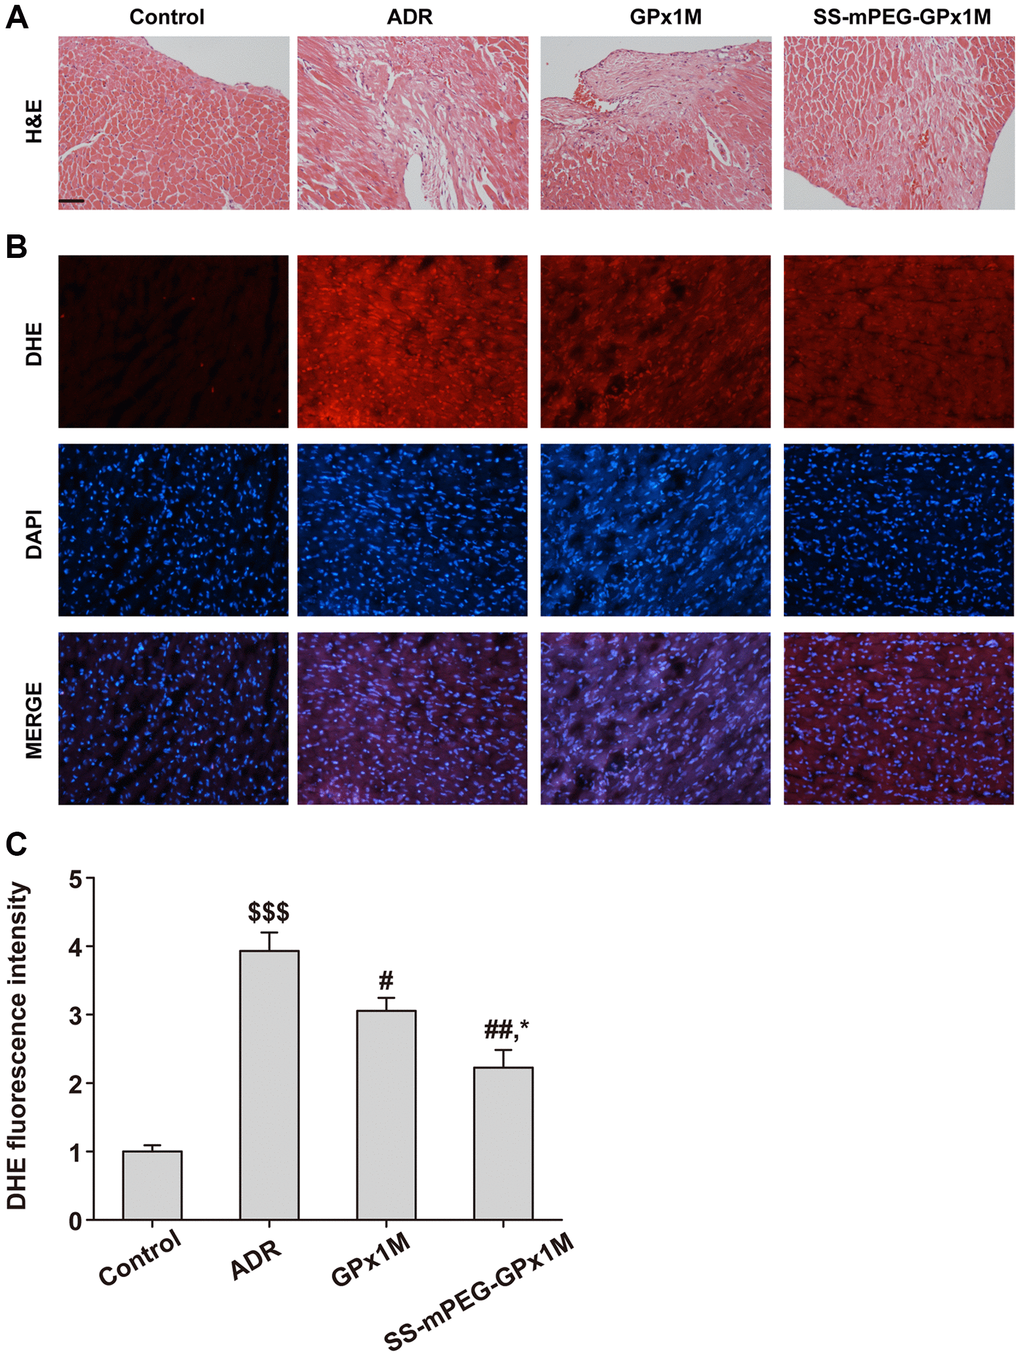 Histopathological changes and ROS measurement in all groups. (A) Analysis of histological evaluation in rat heart tissue using H&E. (B) Determination the accumulation of ROS in rat heart by DHE staining. (C) DHE fluorescence intensity of each group. Scale bars, 100 μm. All data were exhibited as mean ± SD. $$$p #p ##p *p 